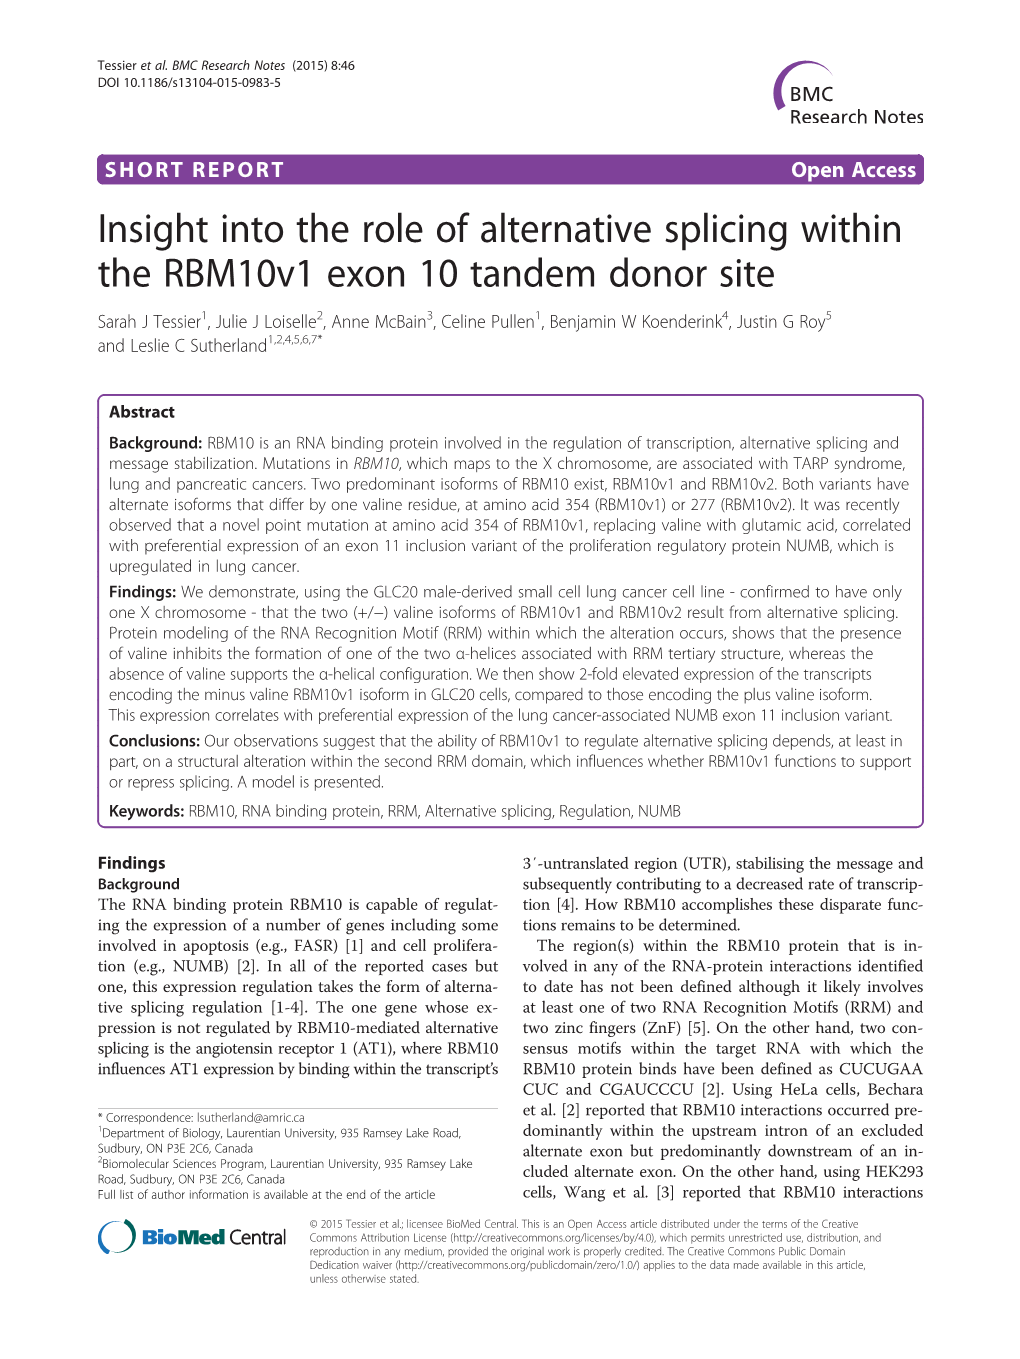 Insight Into the Role of Alternative Splicing Within the Rbm10v1 Exon 10 Tandem Donor Site